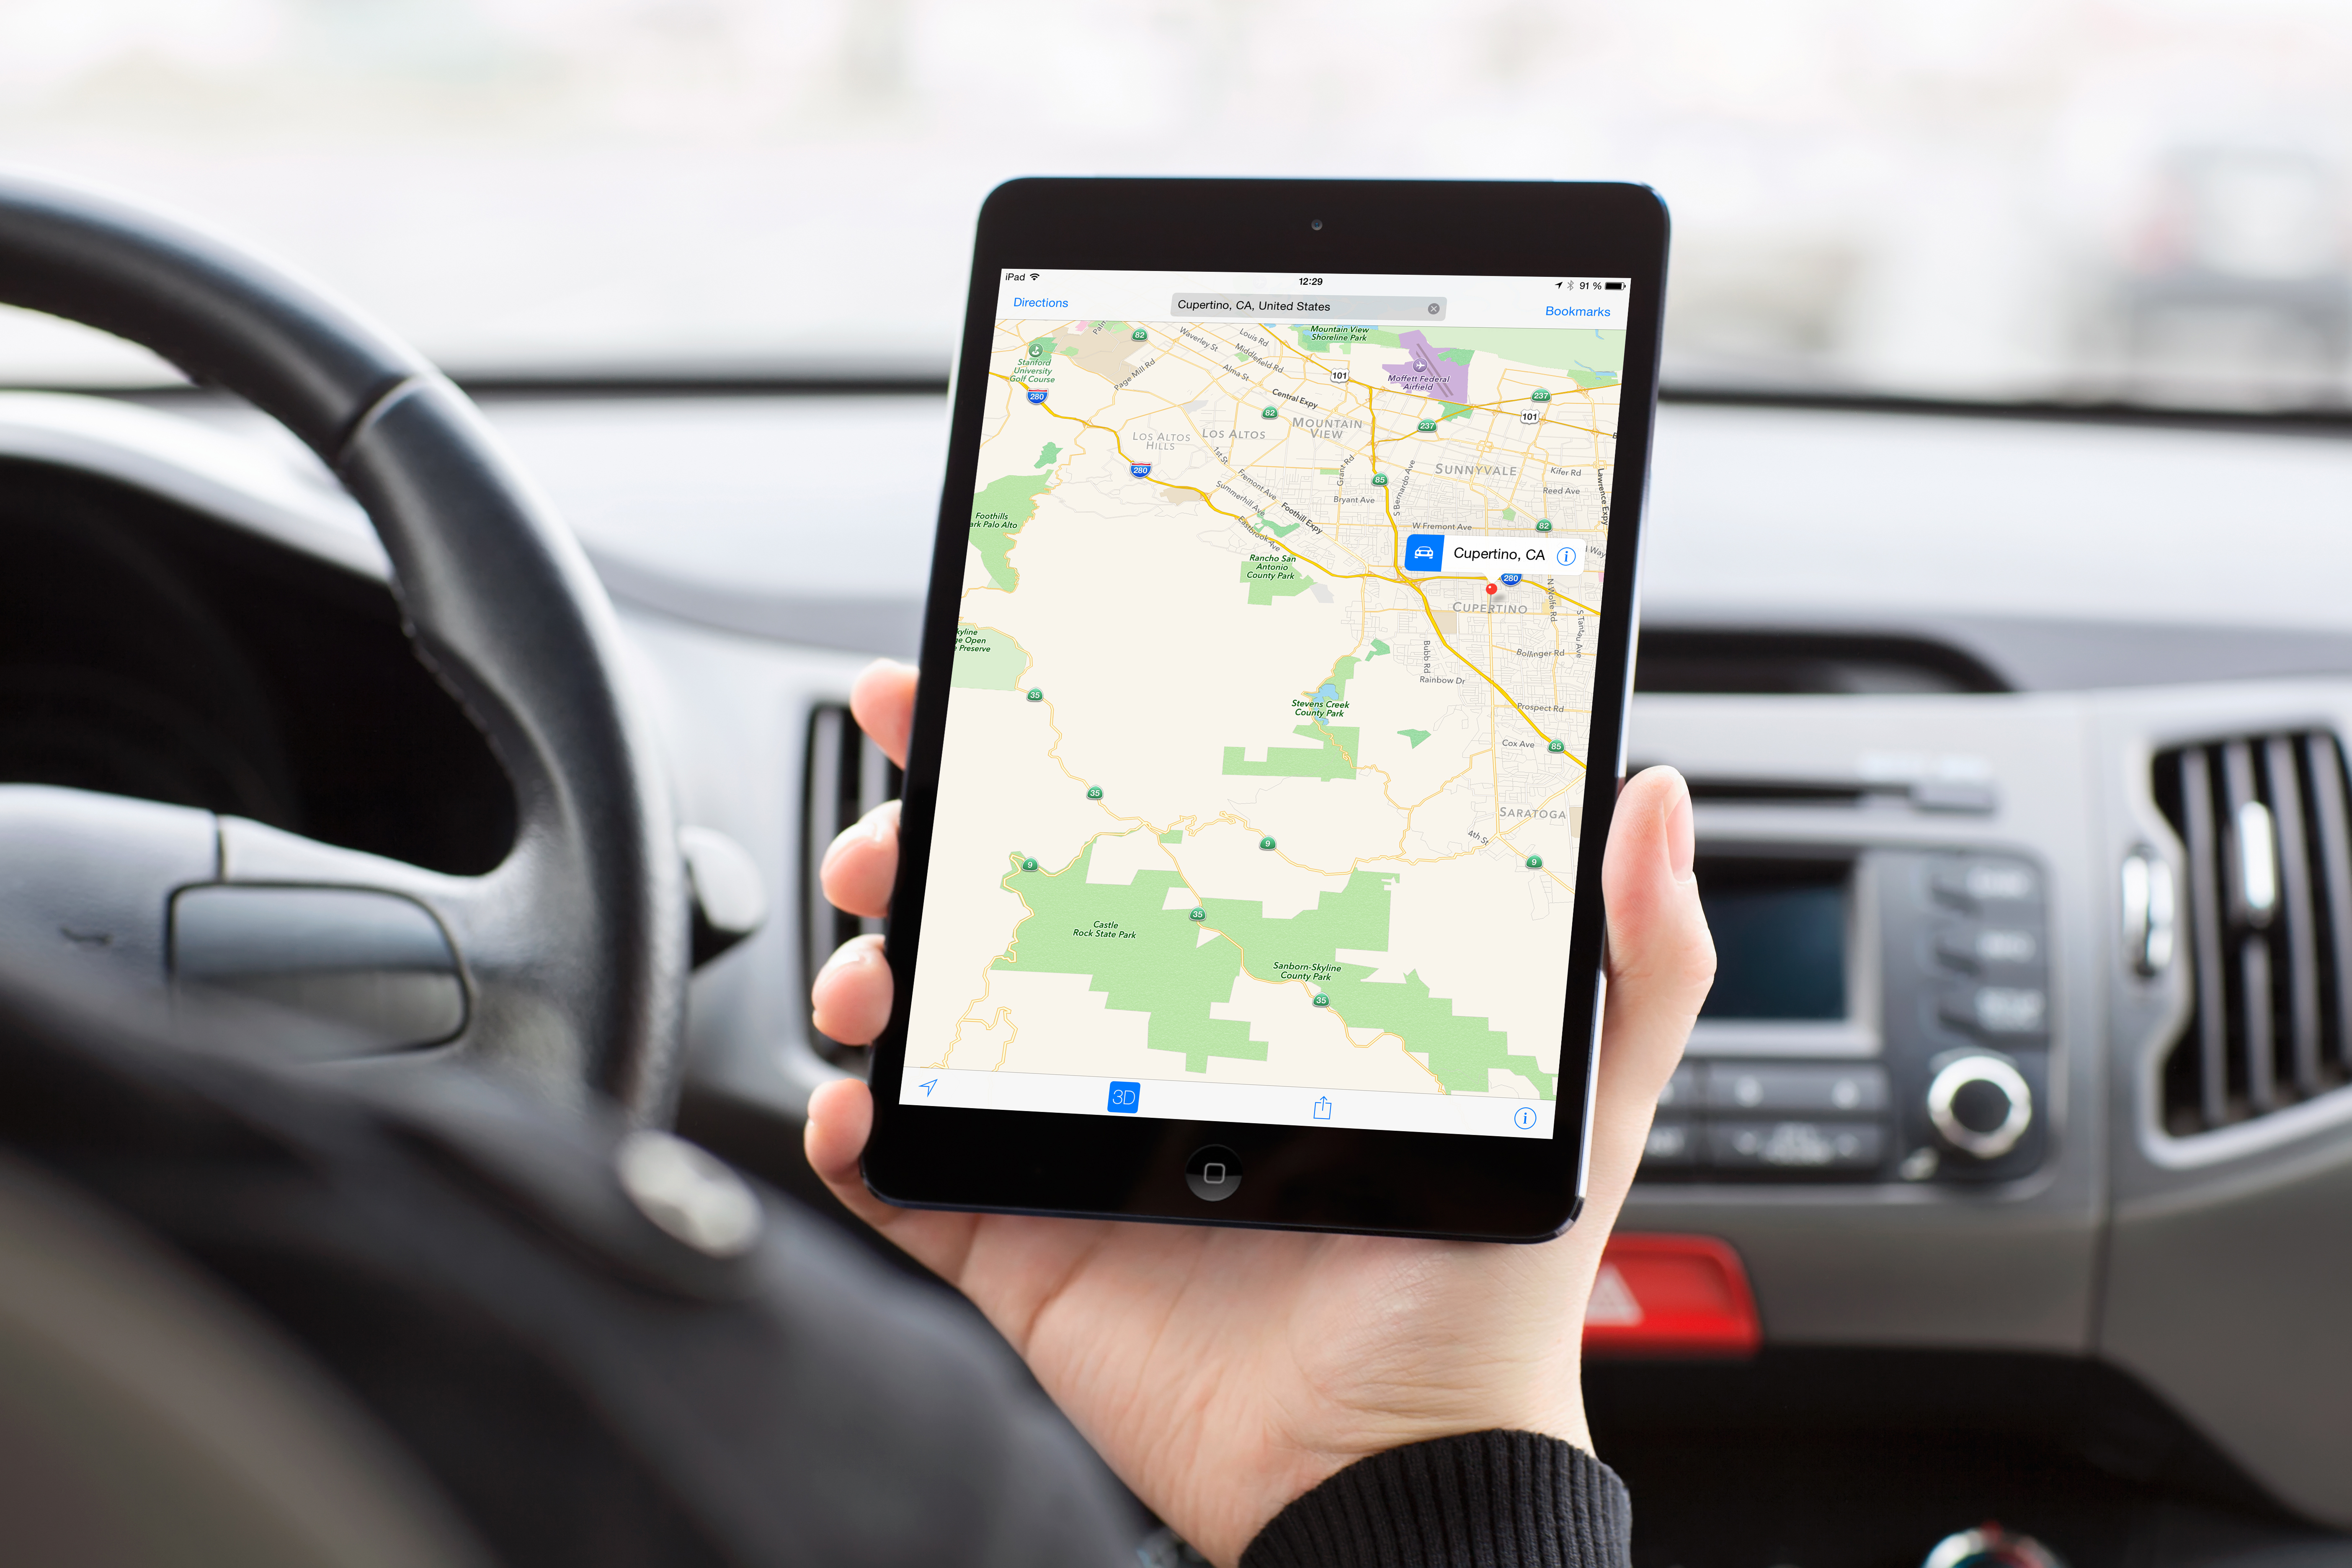 According to the report, Apple Maps is now used three times as often as its next leading competitor (Google Maps) on iPhone and iPad, with more than 5 billion map related requests ever week. Image Credit: SignPost